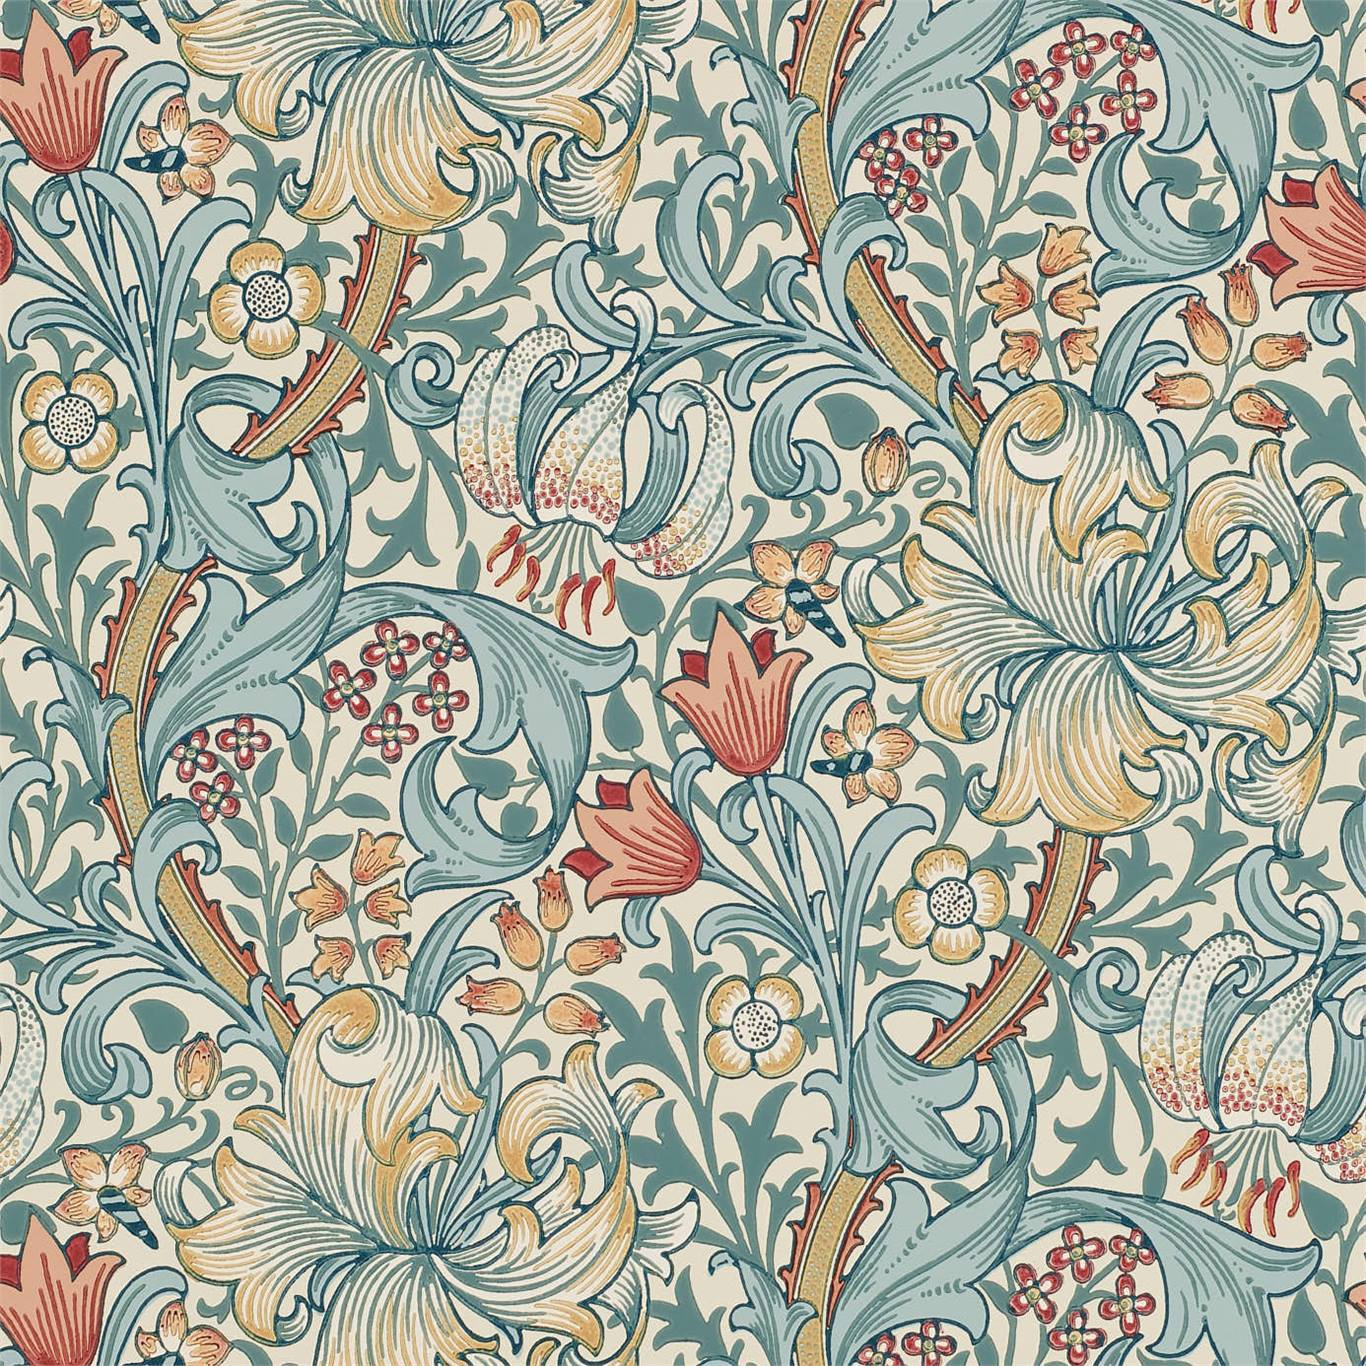 Golden Lily Slate/Manilla Wallpaper DCMW216818 by Morris & Co